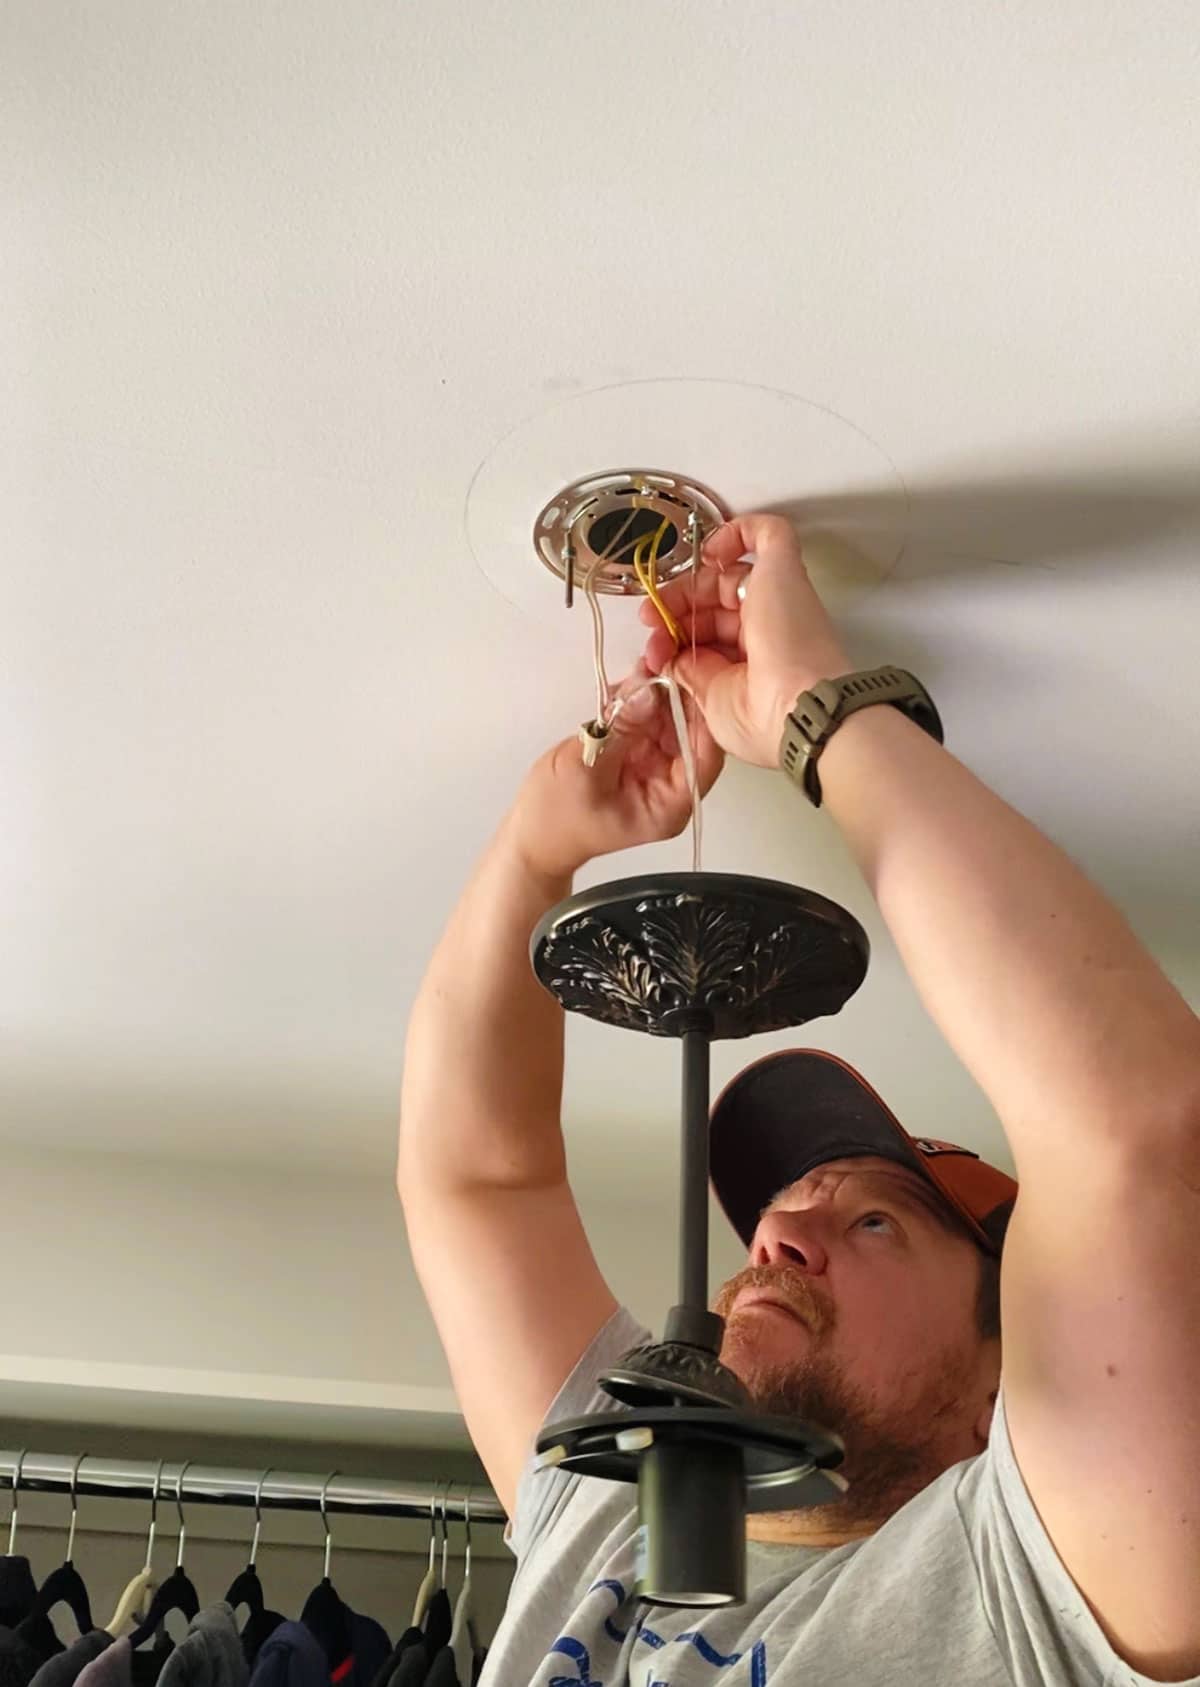 How To Change A Ceiling Light Fixture - install the new mounting plate before rewiring the new lighting